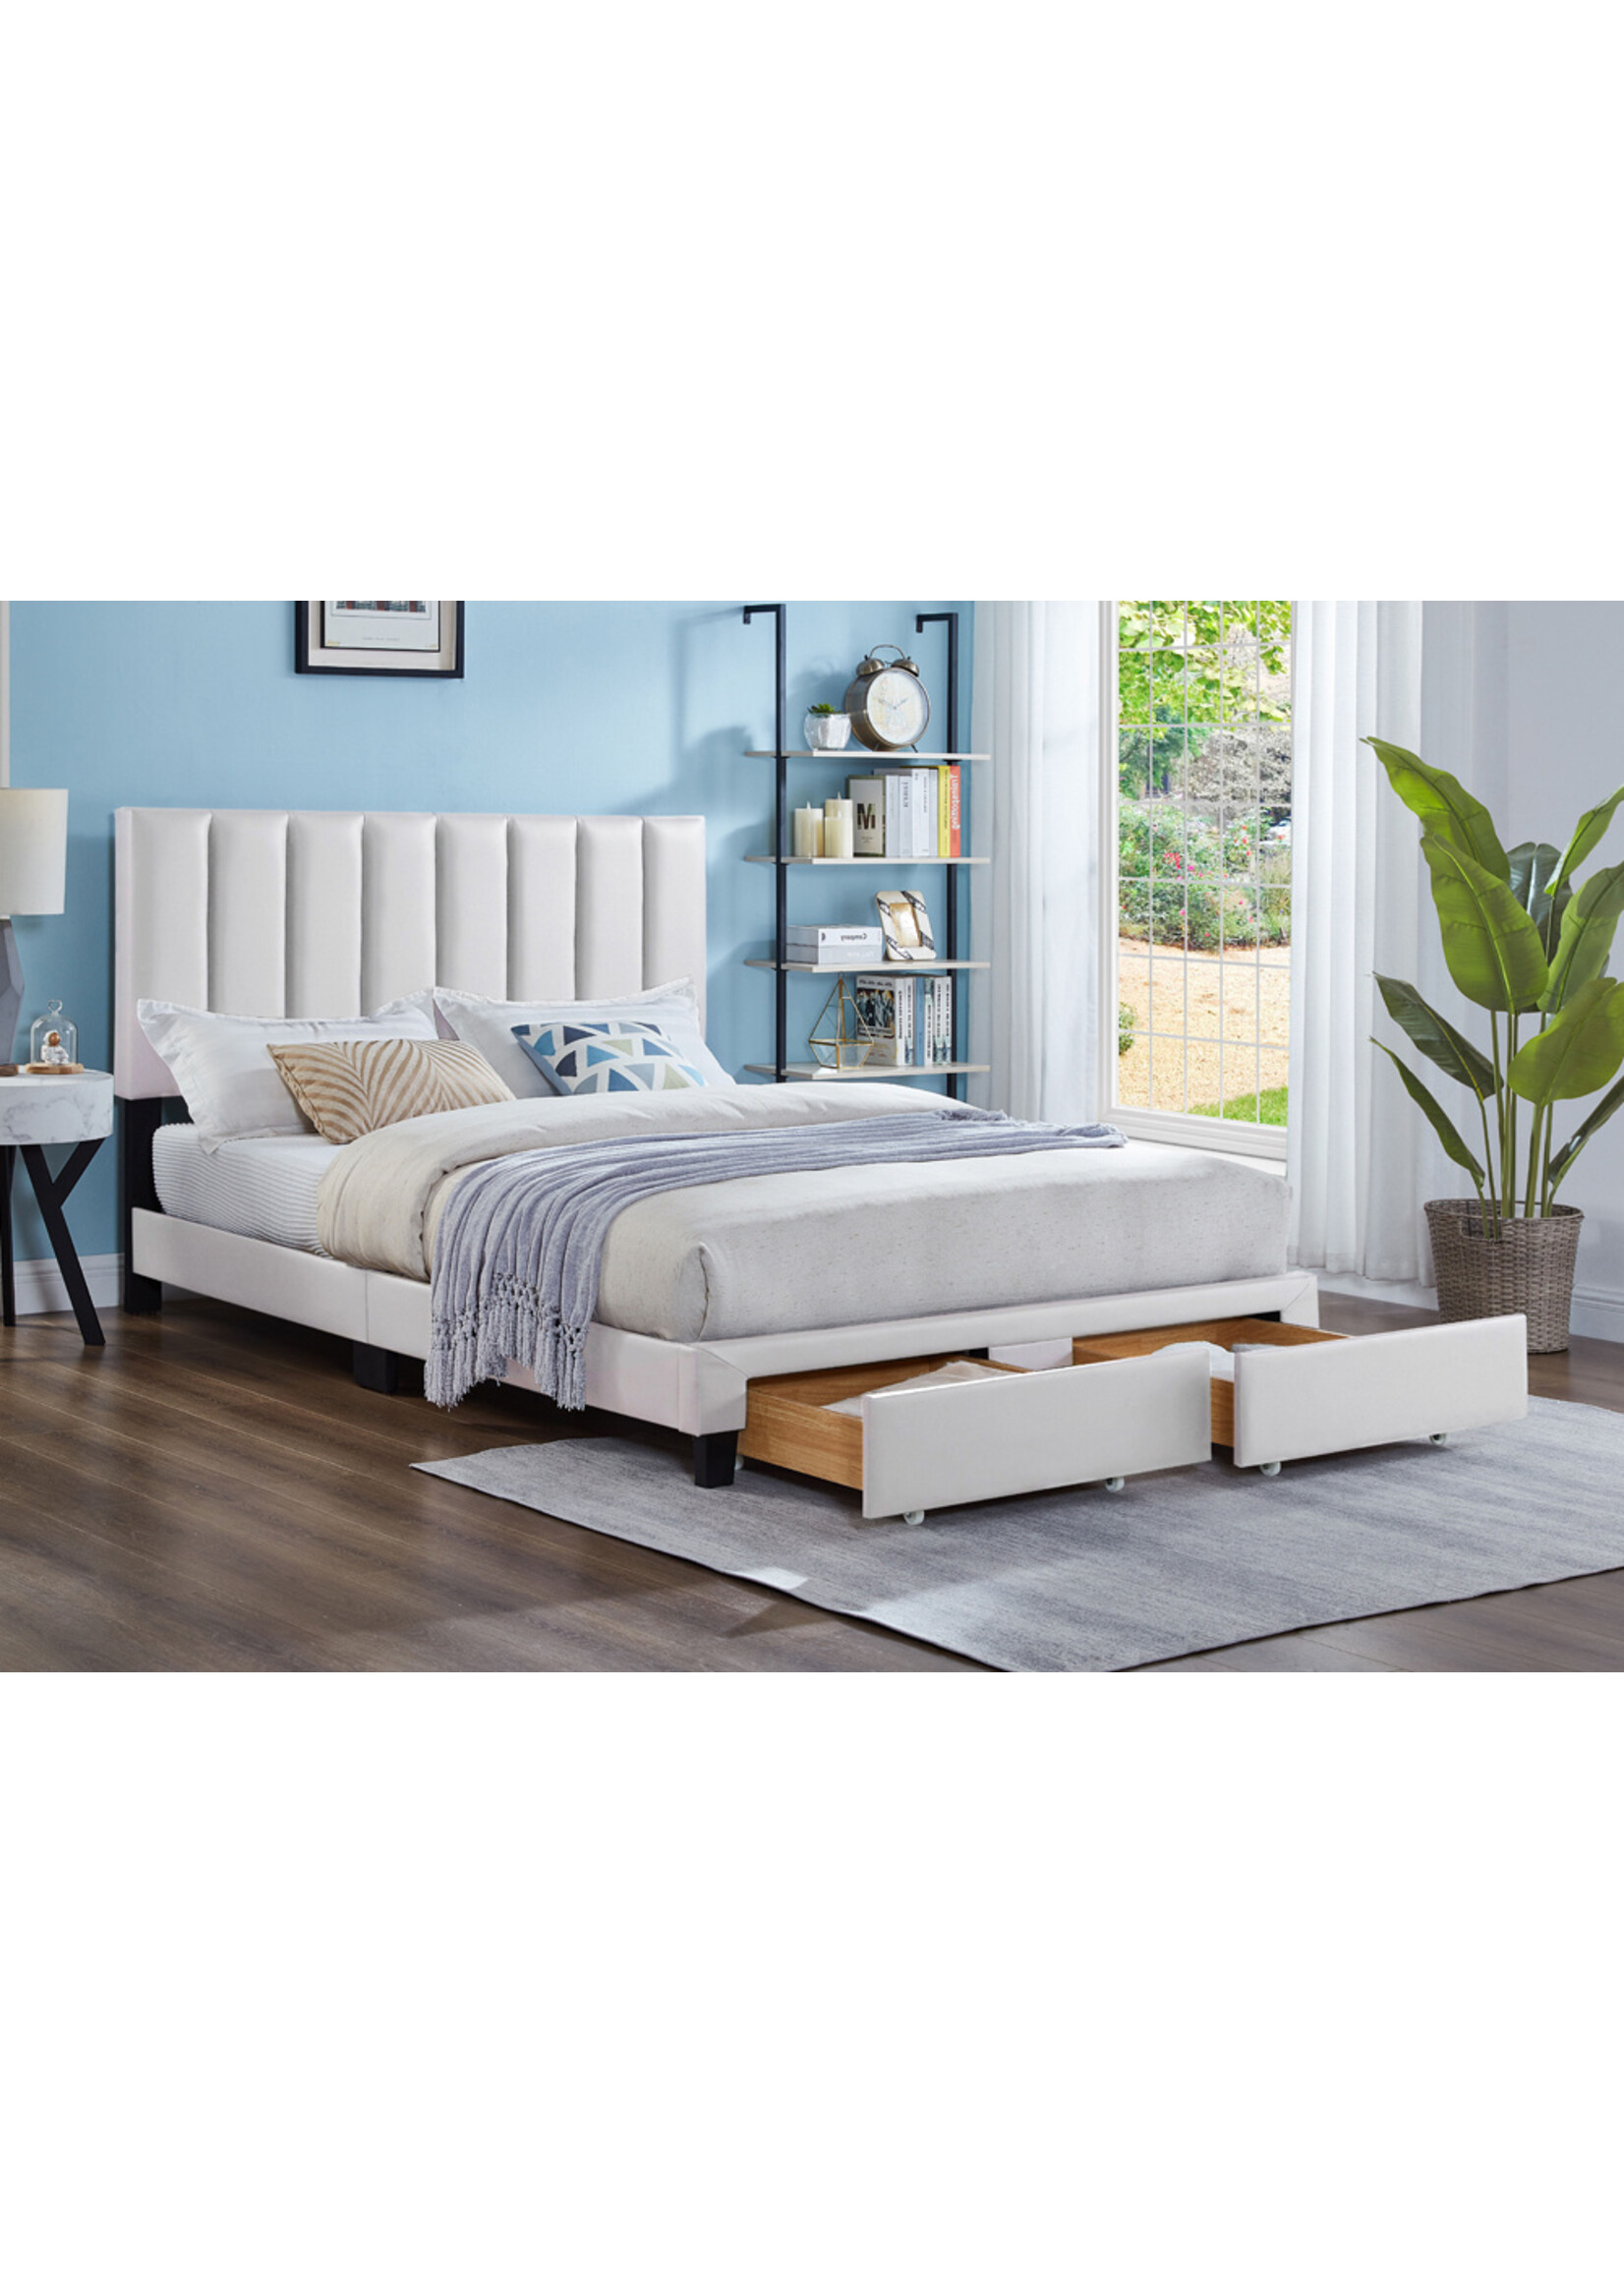 2120 Upholstered Platform Bed with Storage, White